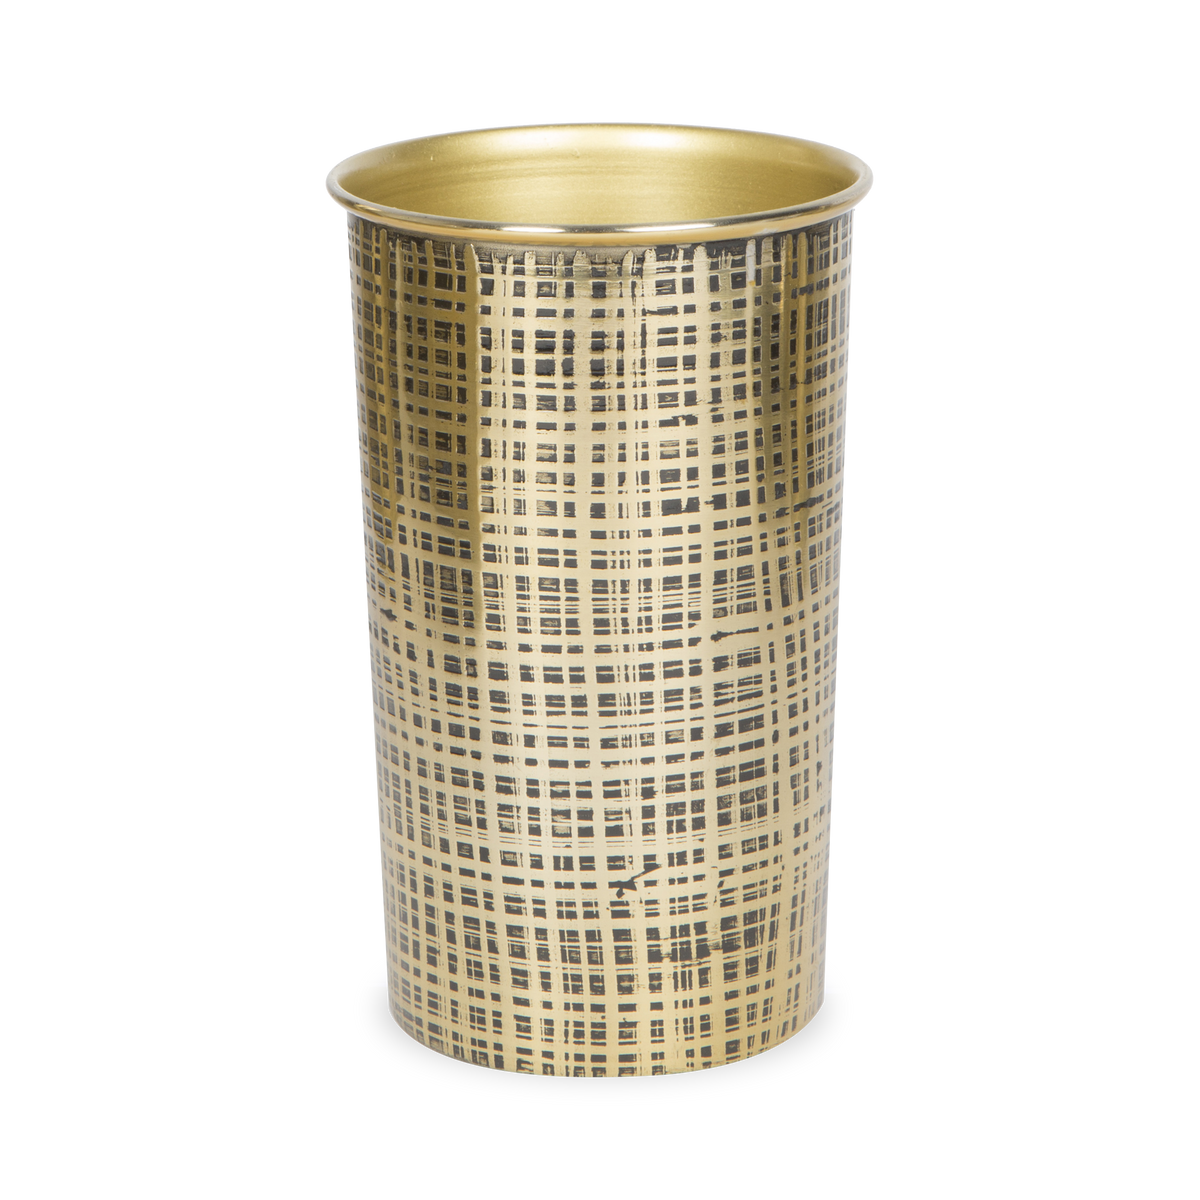 The richly finished Crosshatch Tumbler showcases a distinct crosshatch texture in a brass finish.